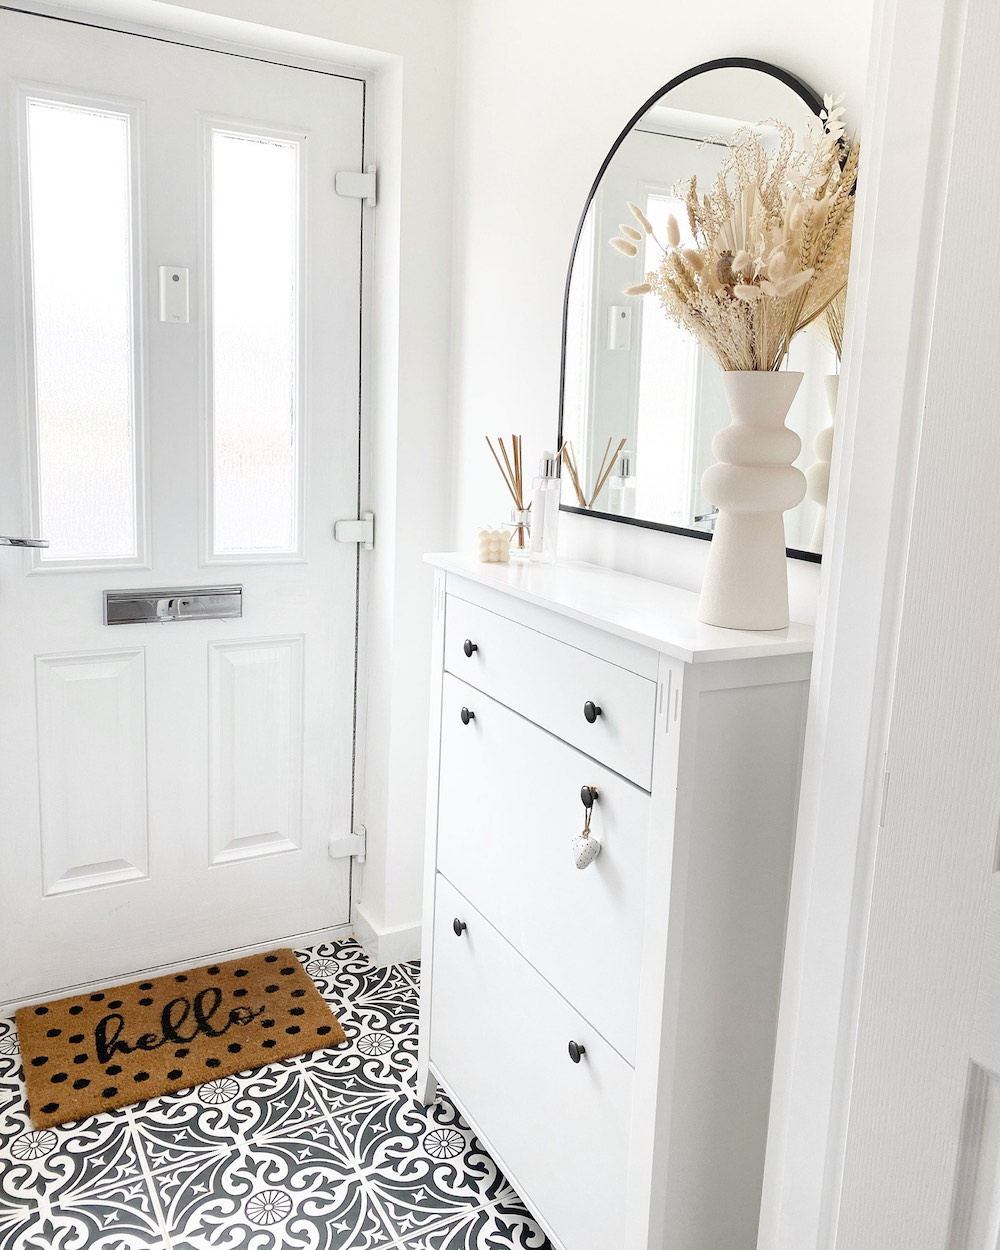 A soft white neutral foyer with a patterned tile floor